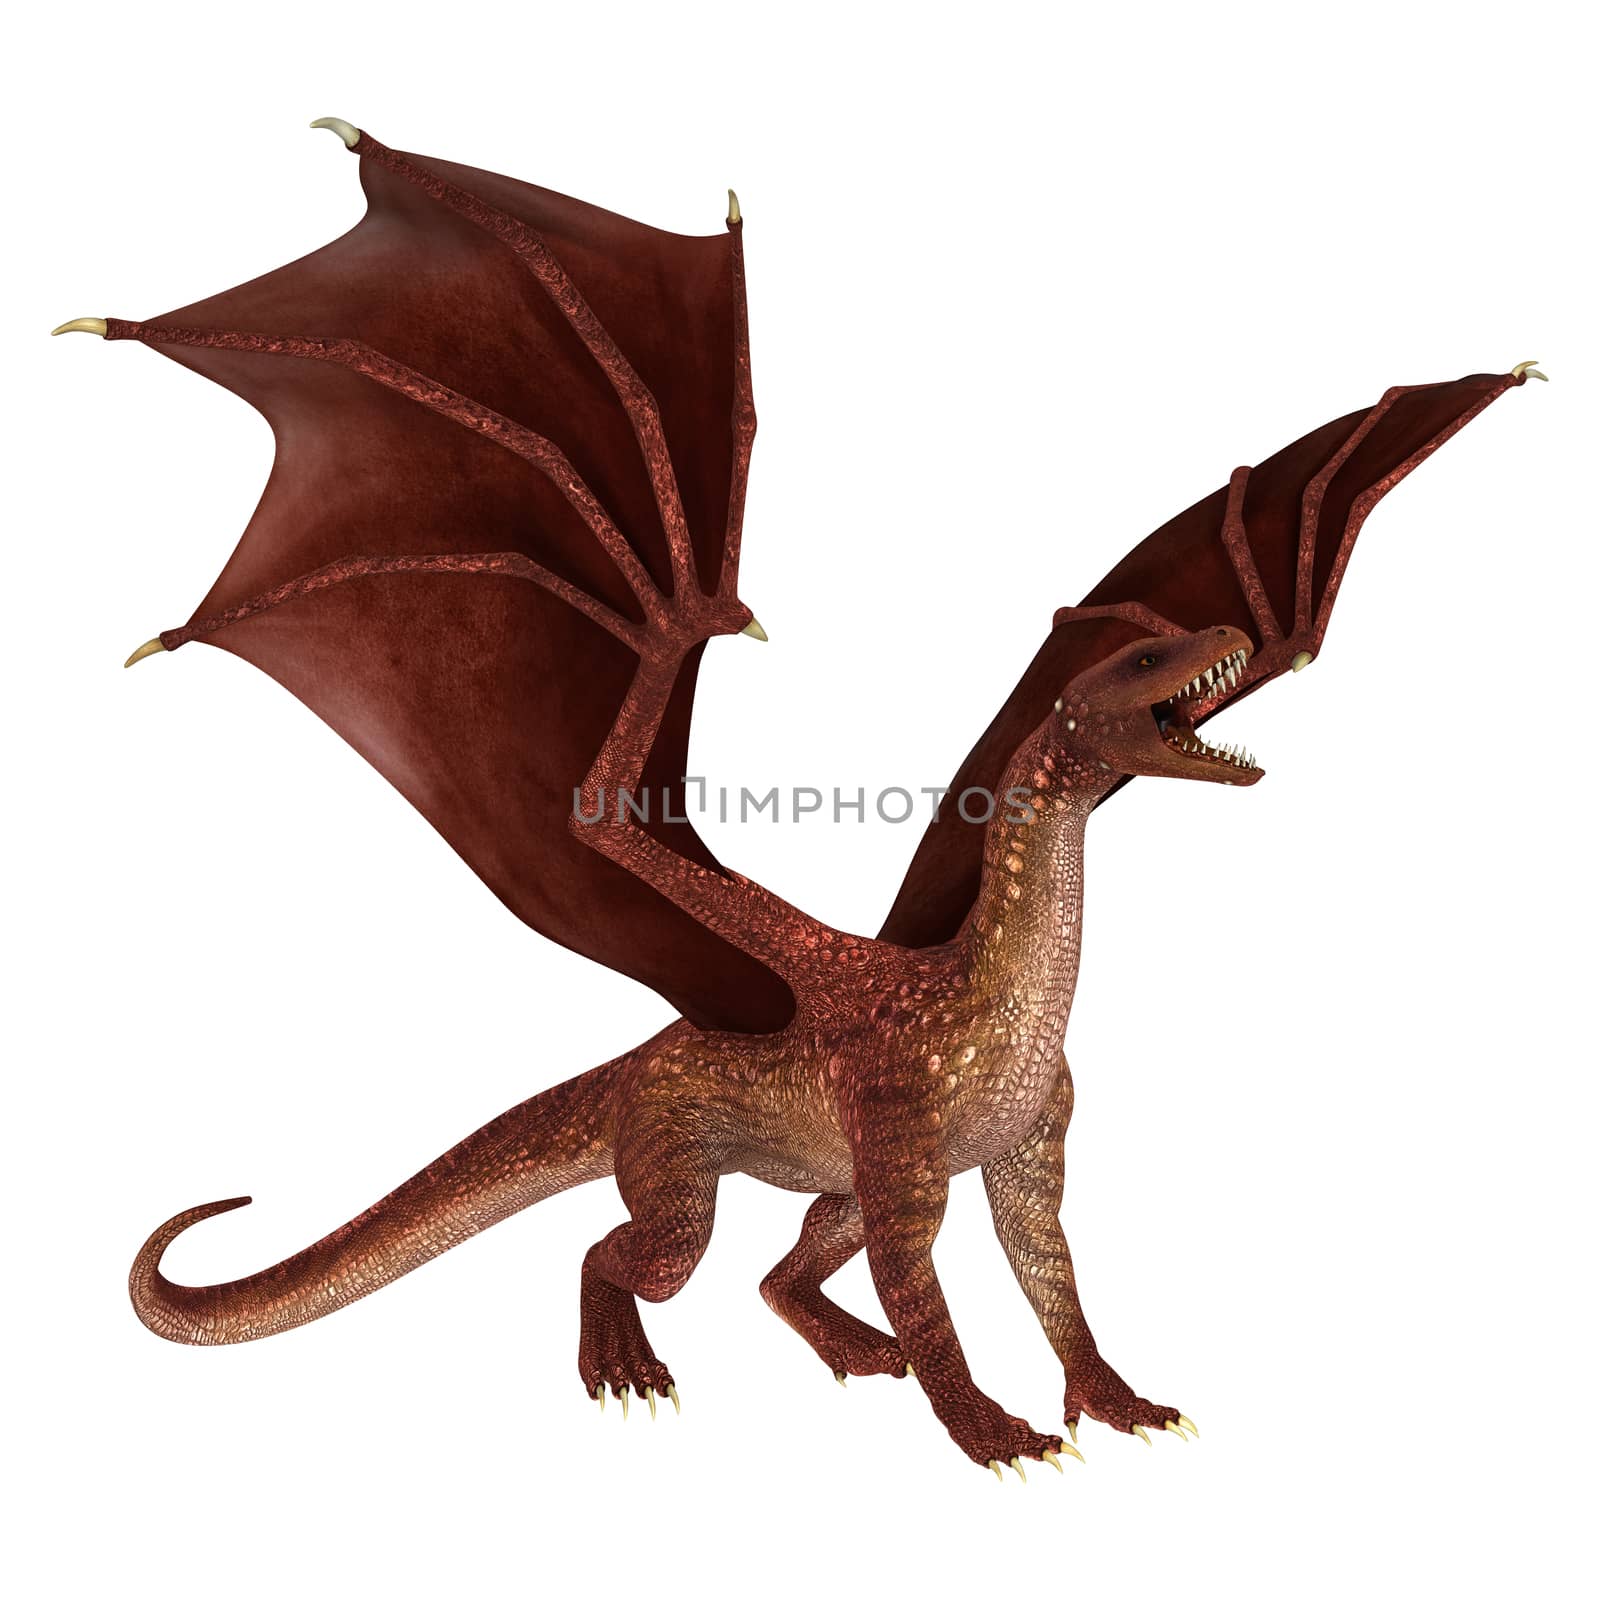 3D digital render of a roaring red fantasy dragon isolated on white background